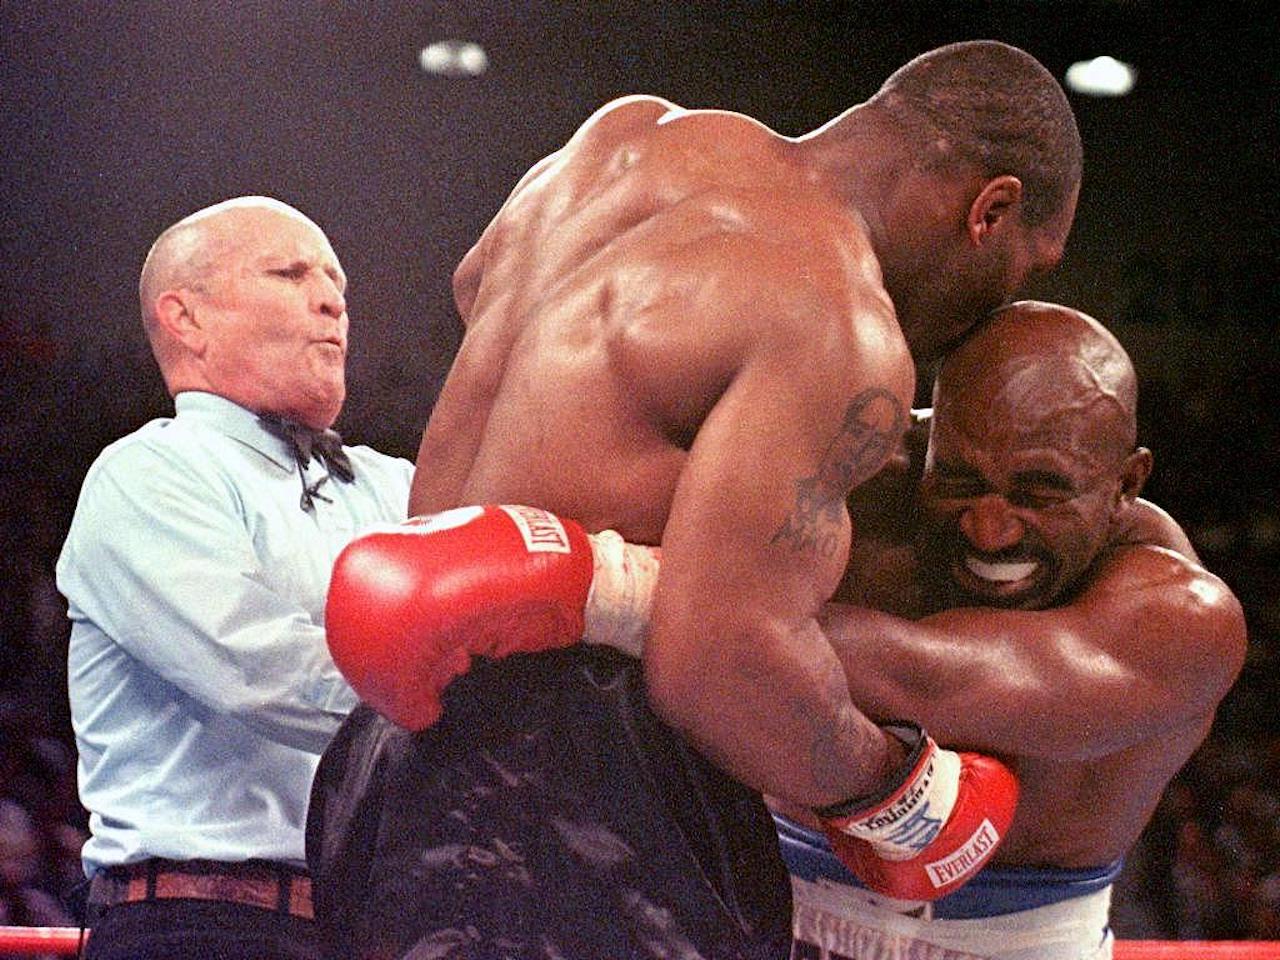 Referee Lane Mills (L) steps in as Evander Holyfield (R) reacts after Mike Tyson bit his ear in the third round of their WBA heavyweight championship fight